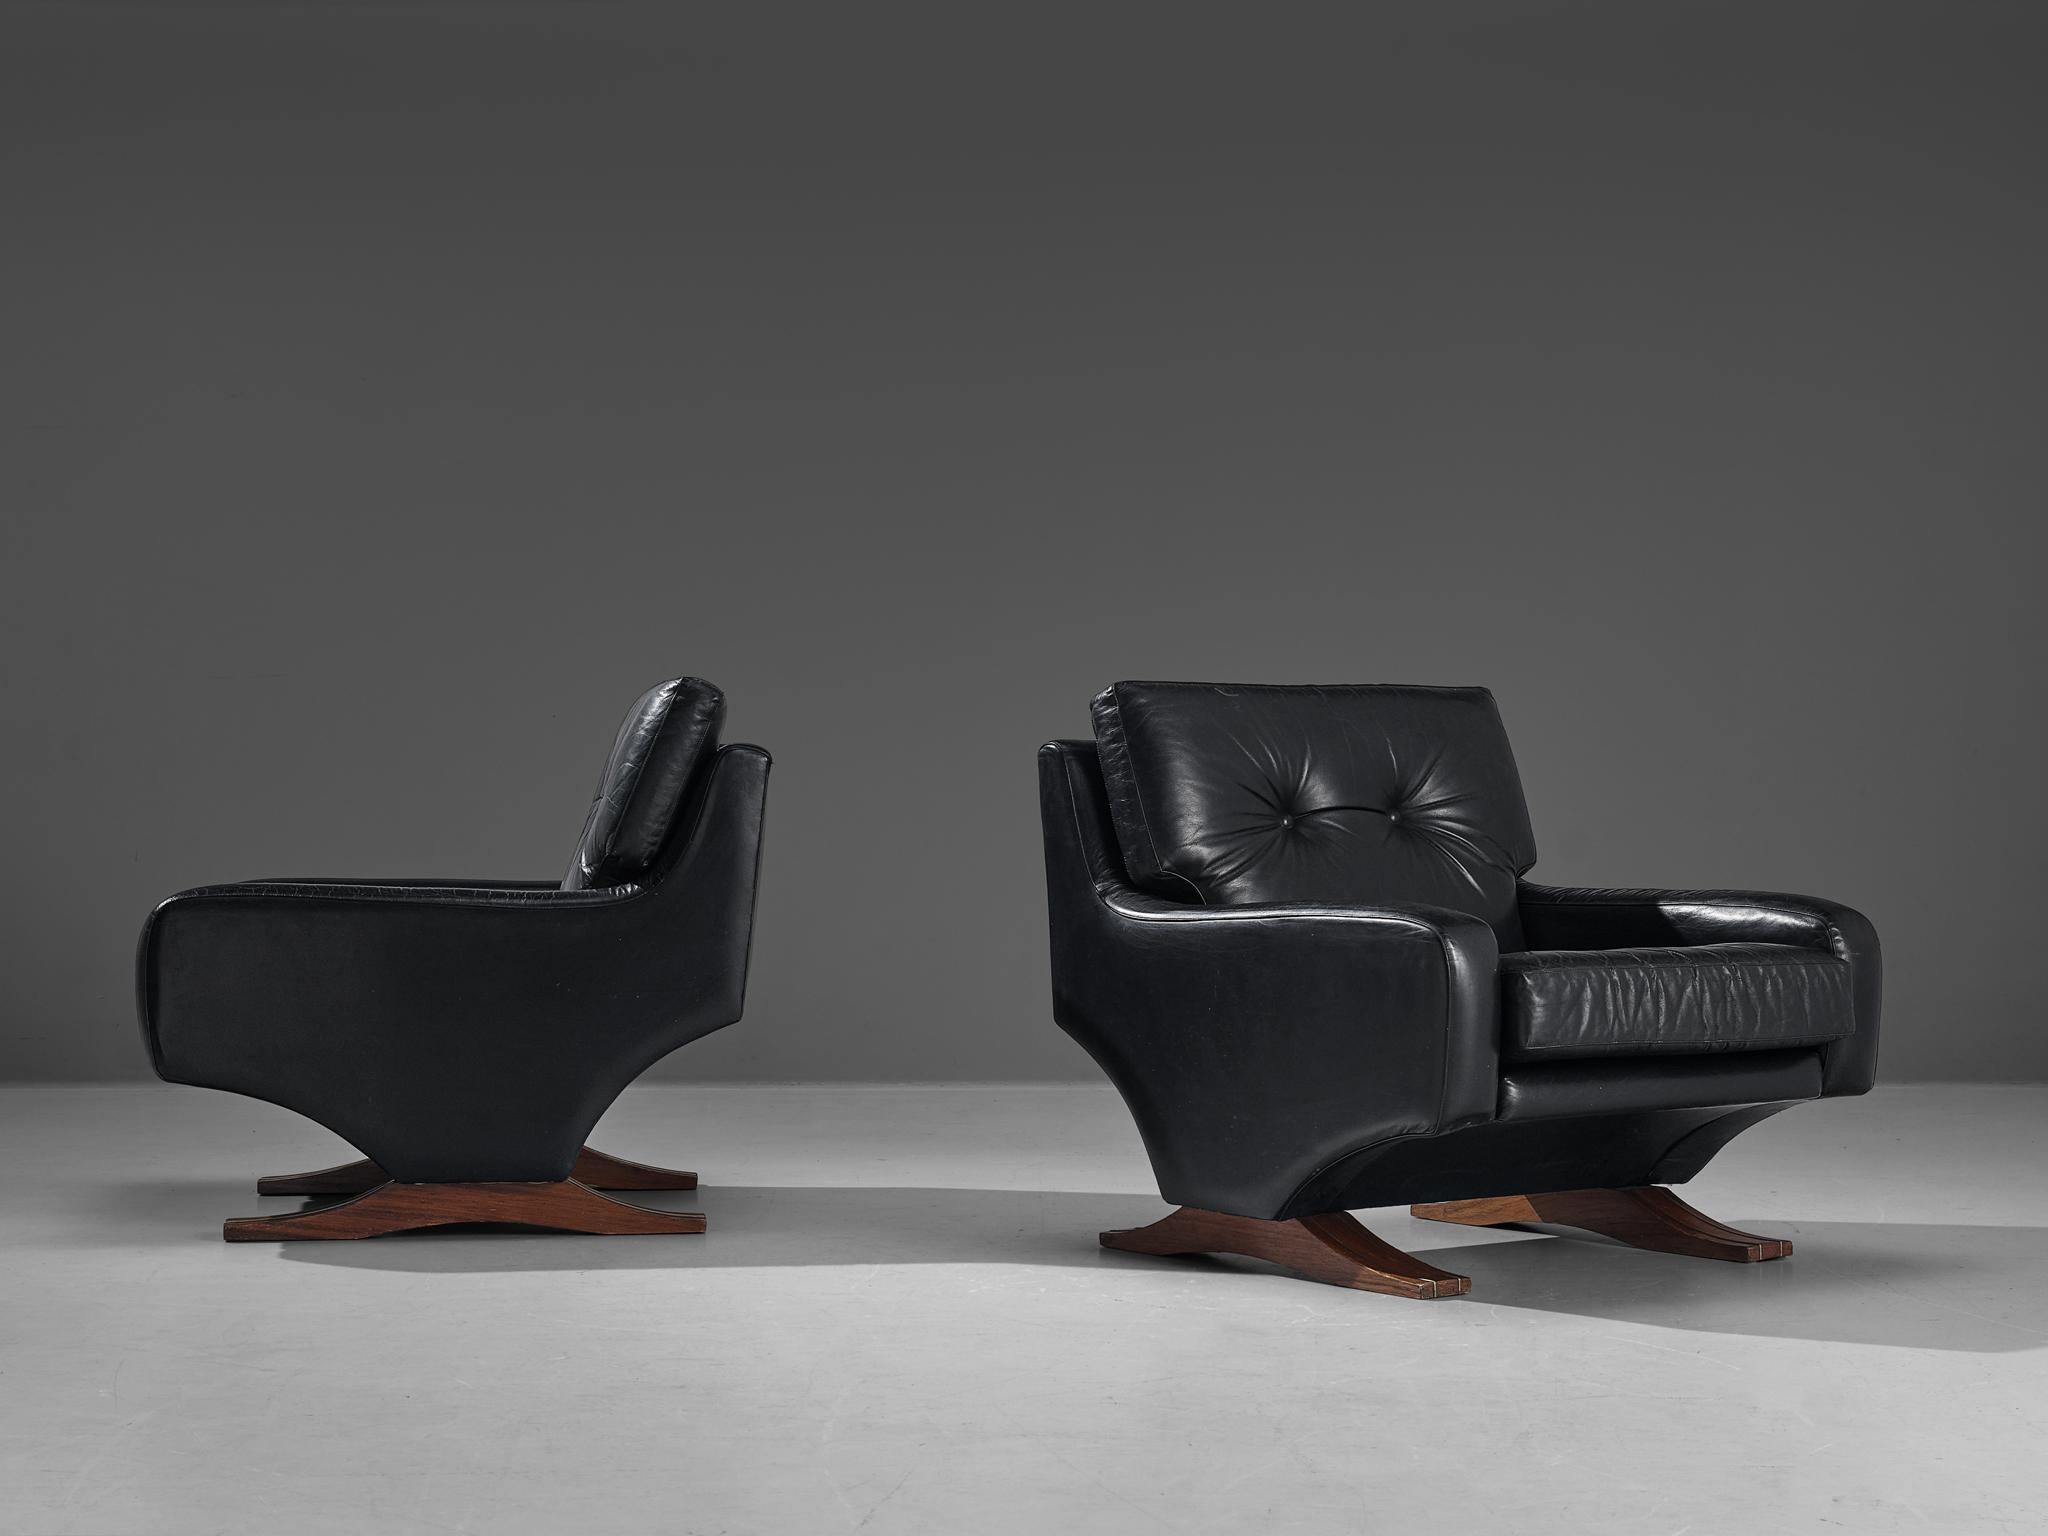 Franz Sartori for Flexform, pair of lounge chairs, leather, stained wood, metal, Italy, circa 1965.

This robust easy chair, designed by Italian sculptor Franz Sartori, stands as a testament to mid-century modern design. Enveloped in black leather,